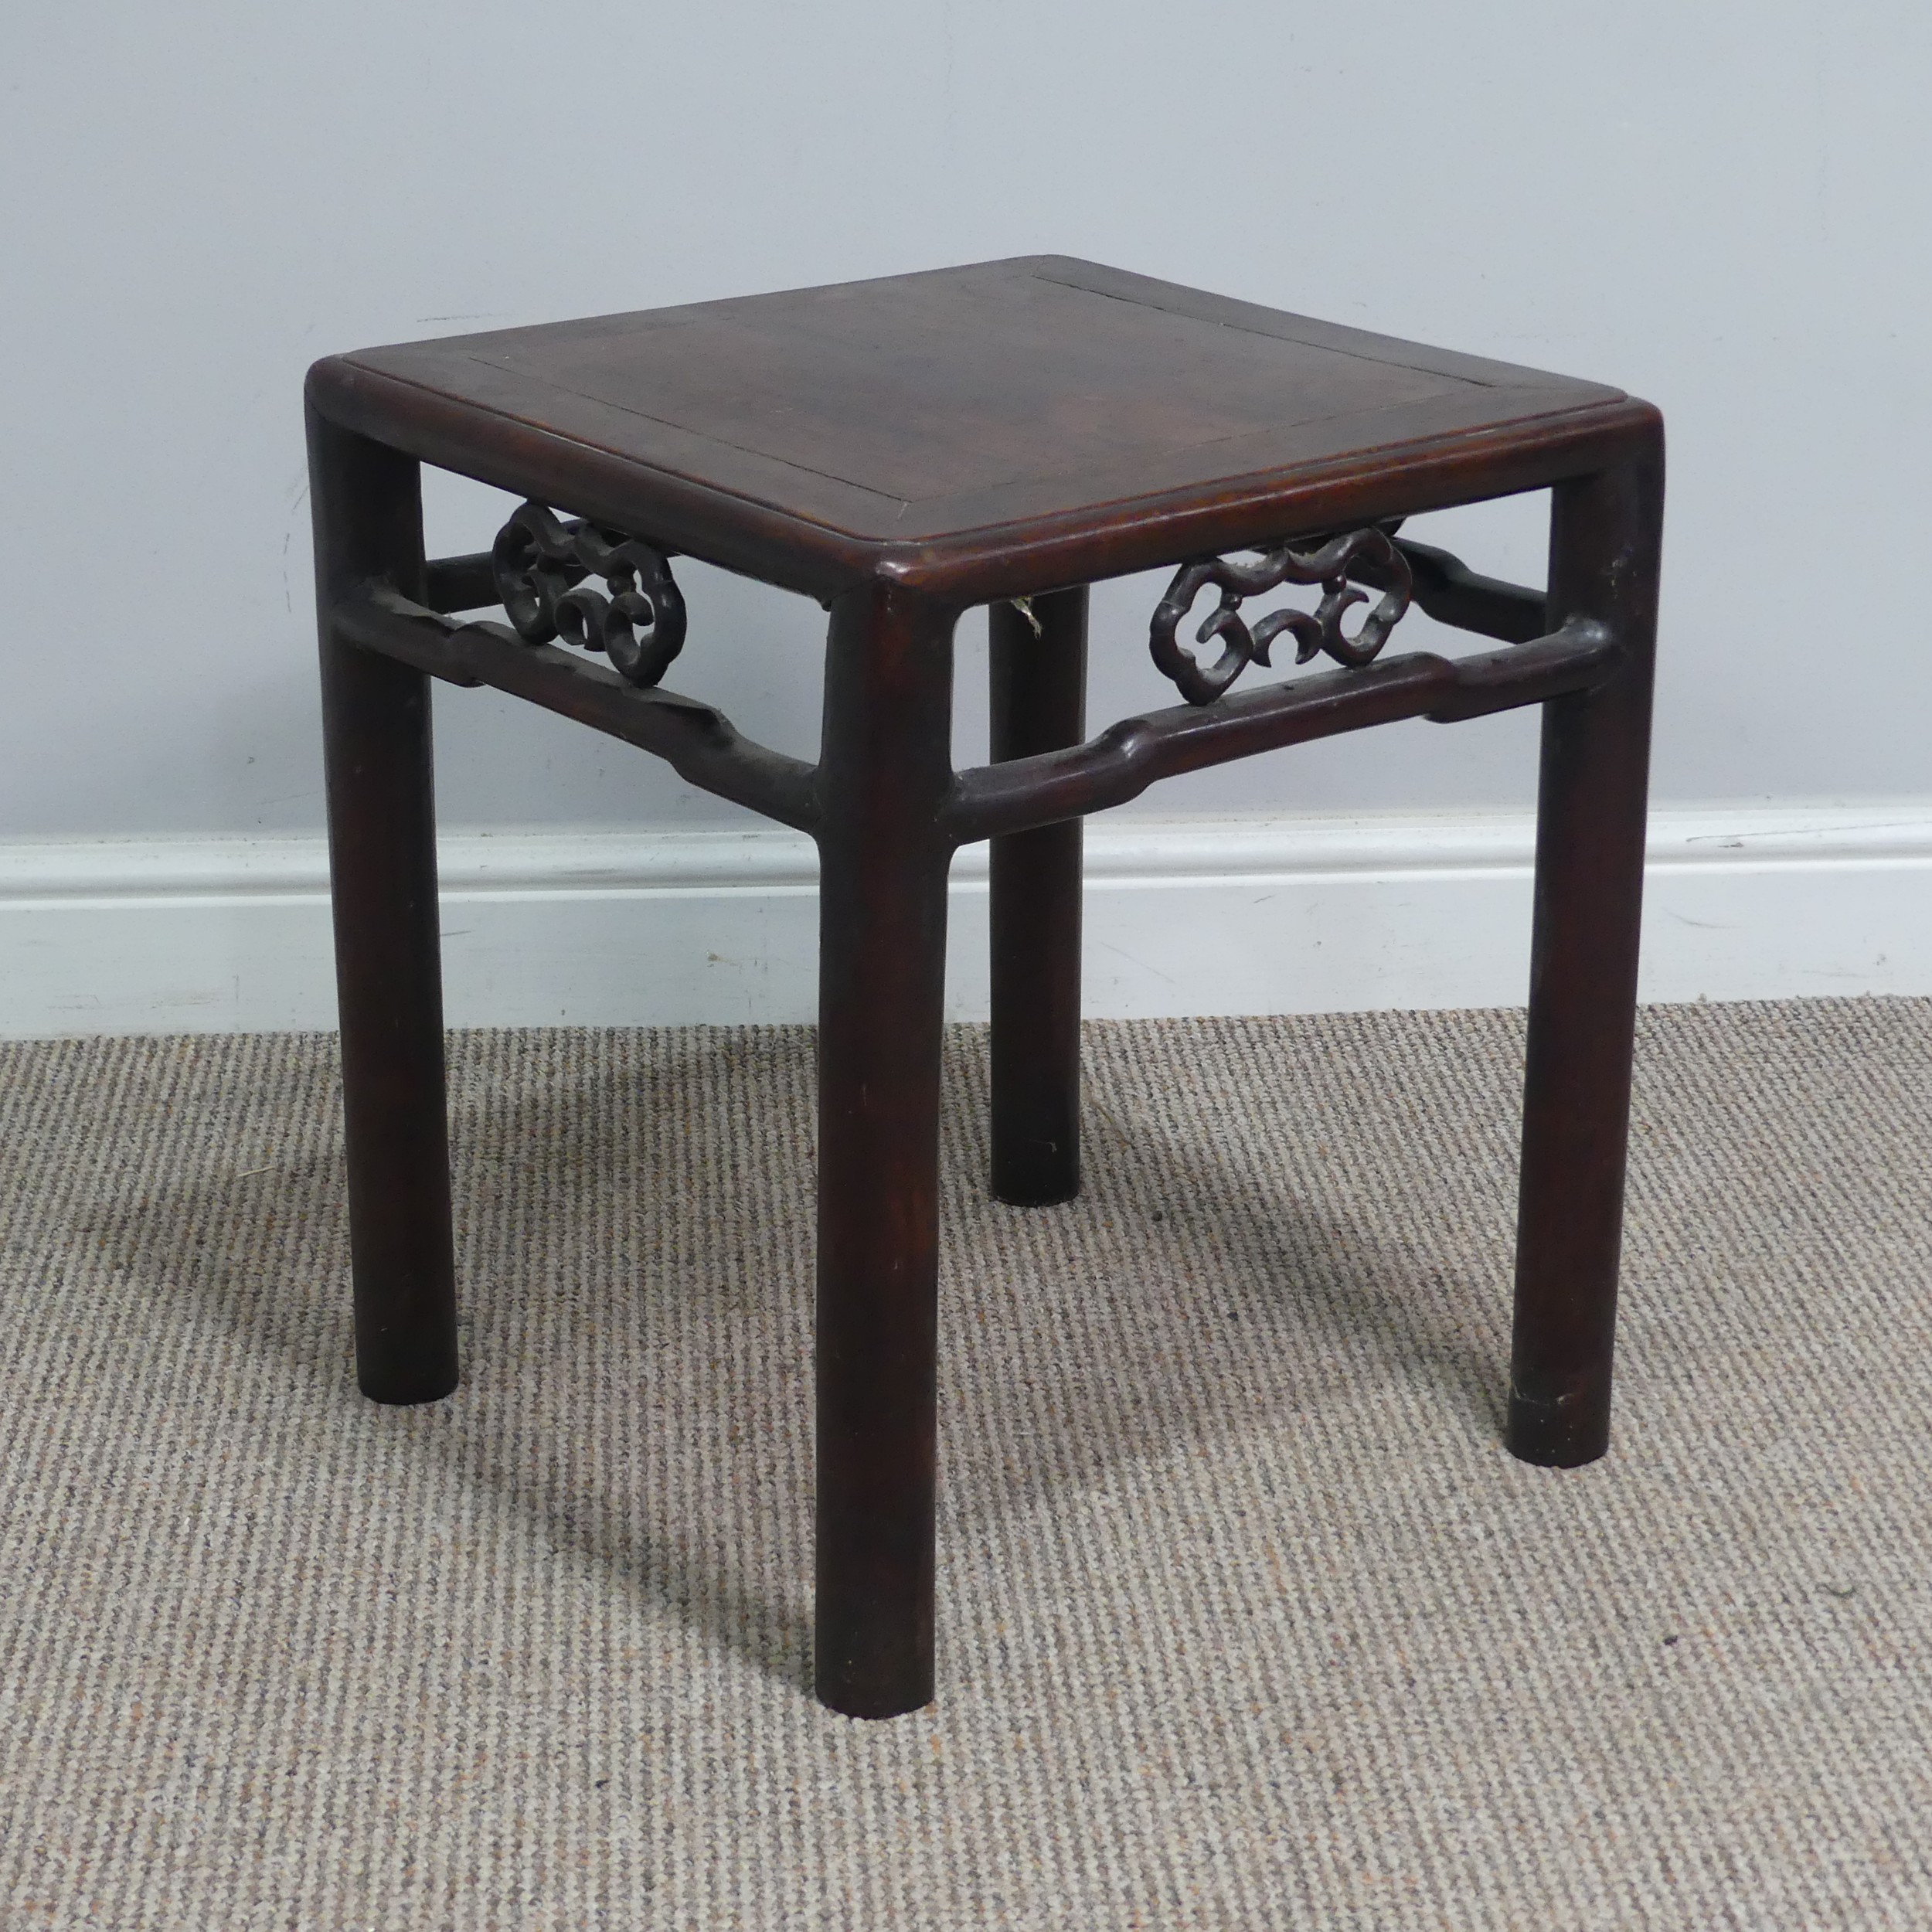 An antique Chinese carved hardwood side Table / occasional Table, of small proportions, circa - Image 6 of 6